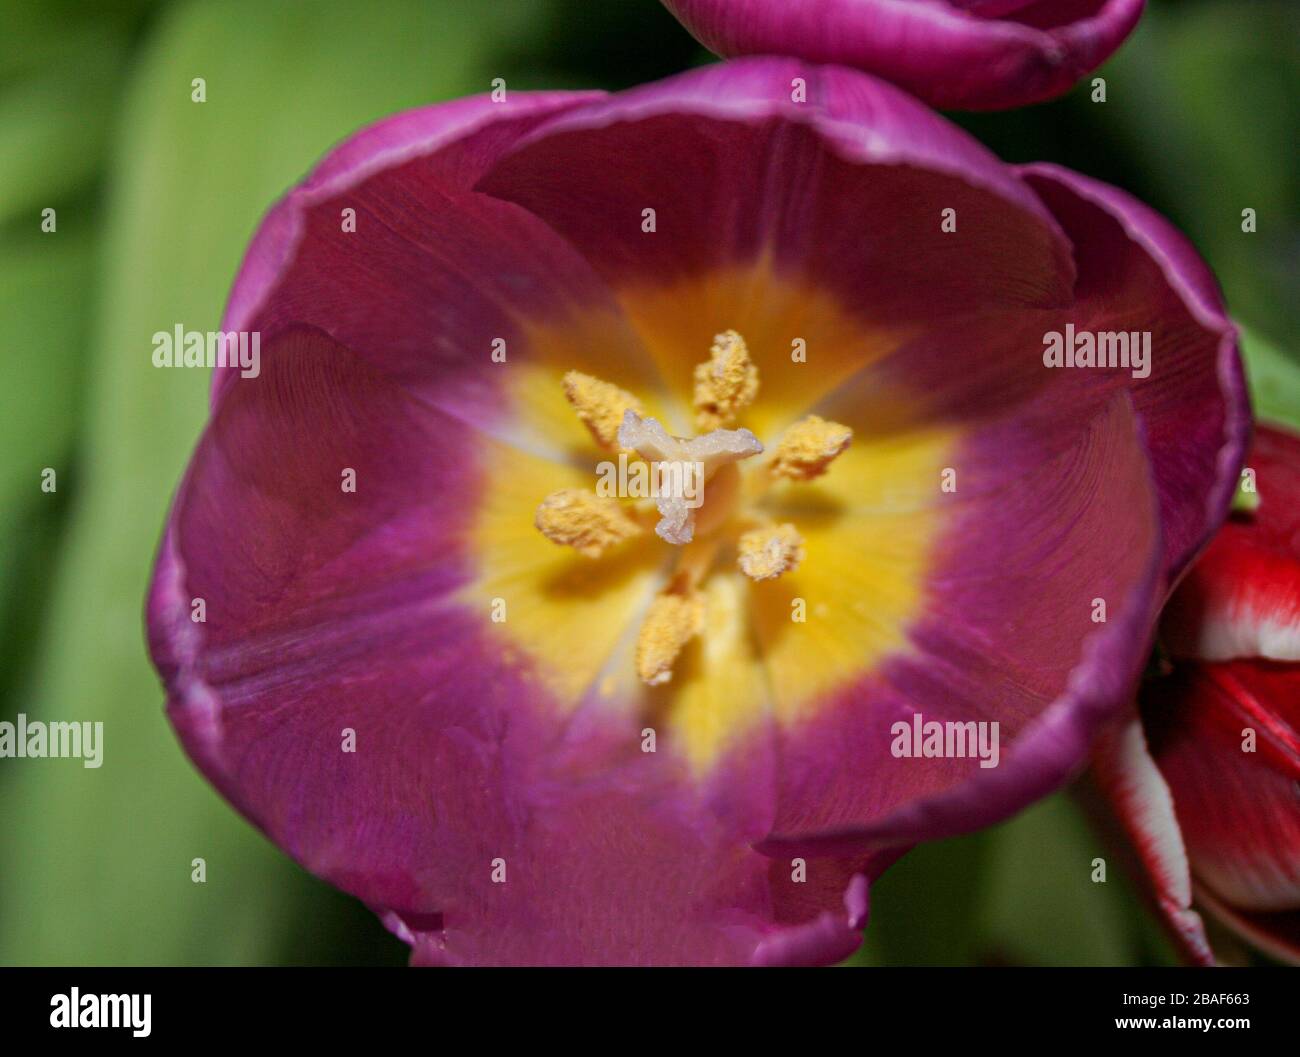 A close up of a purple tulip flower showing yellow pollen and stigma. Stock Photo